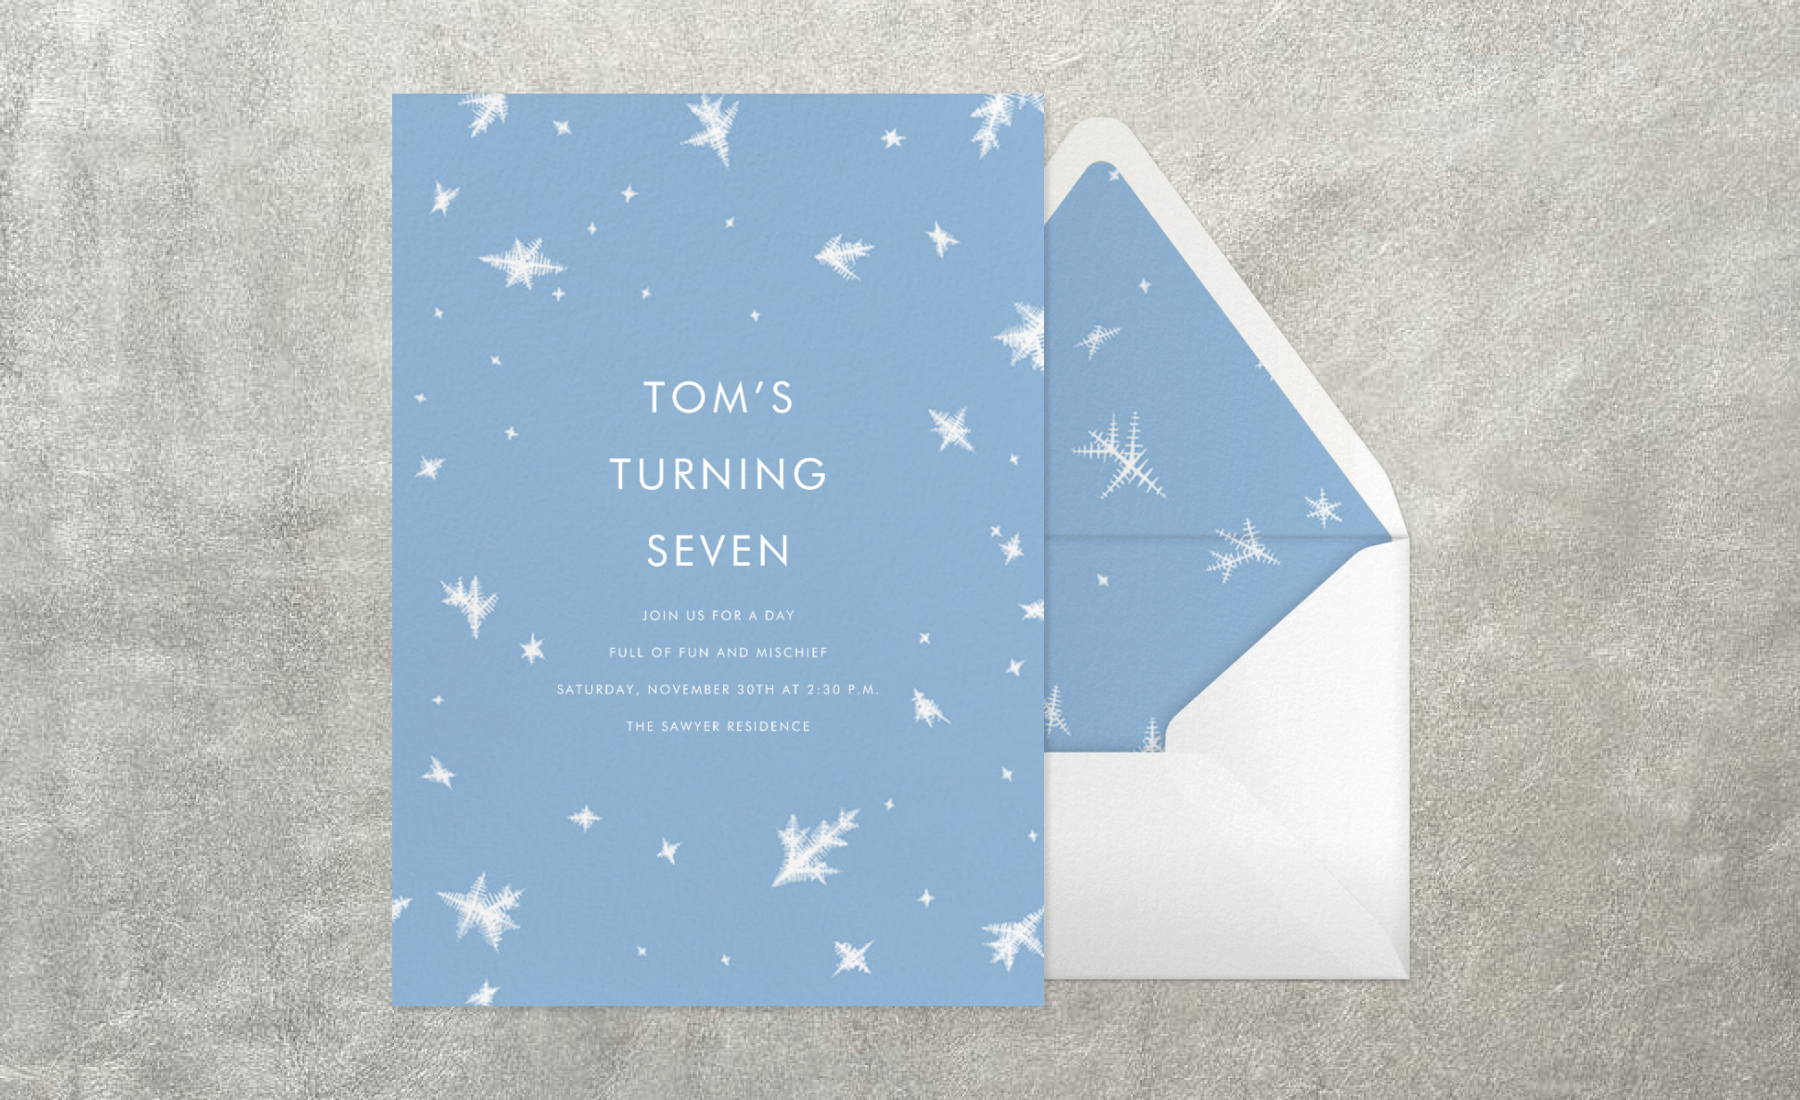 A blue birthday invitation with illustrations of snowflakes, paired with an envelope.